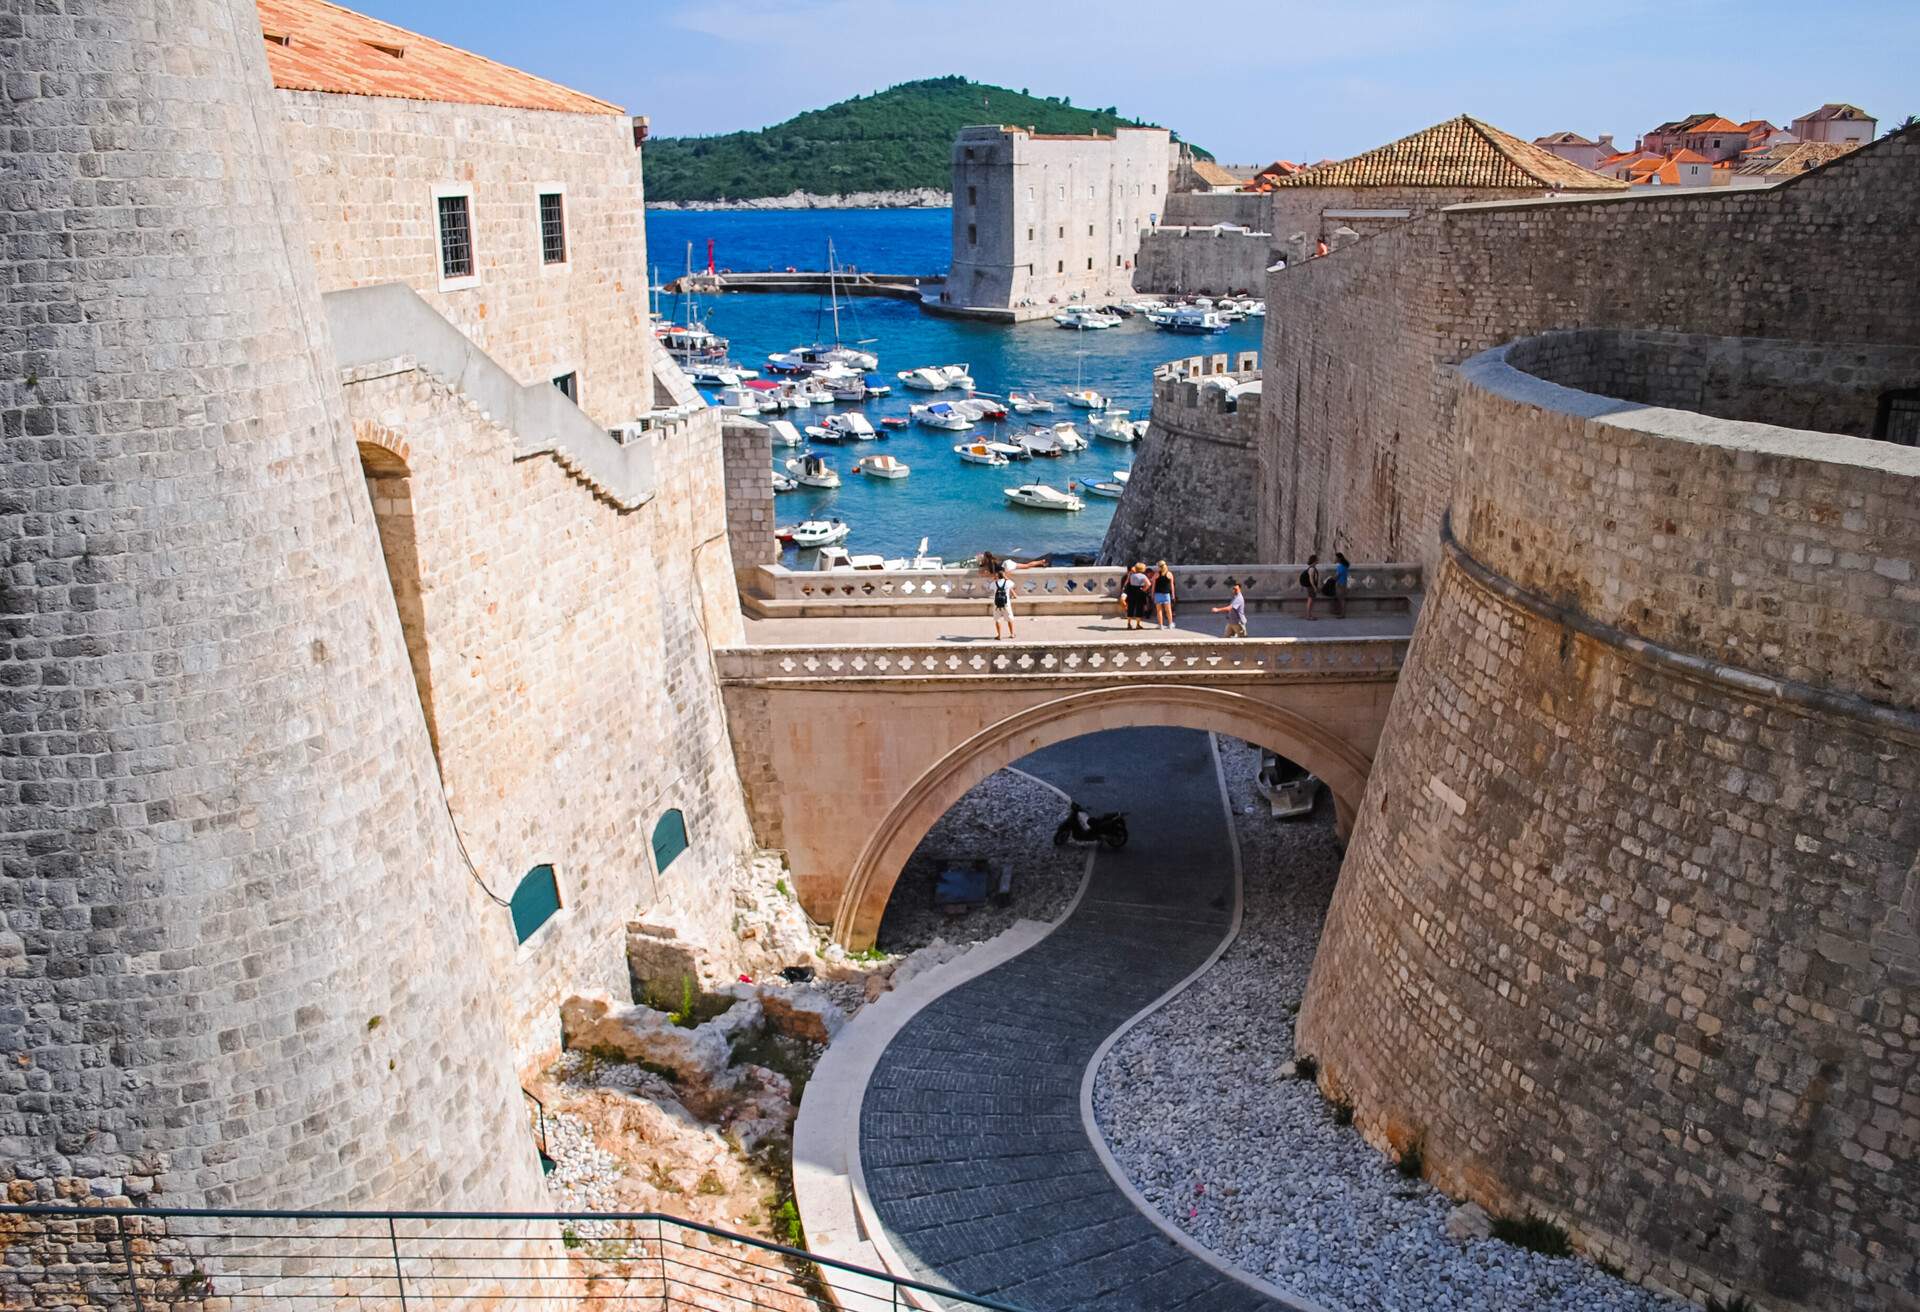 dest_croatia_dubrovnik_gettyimages-607501230_universal_within-usage-period_24297